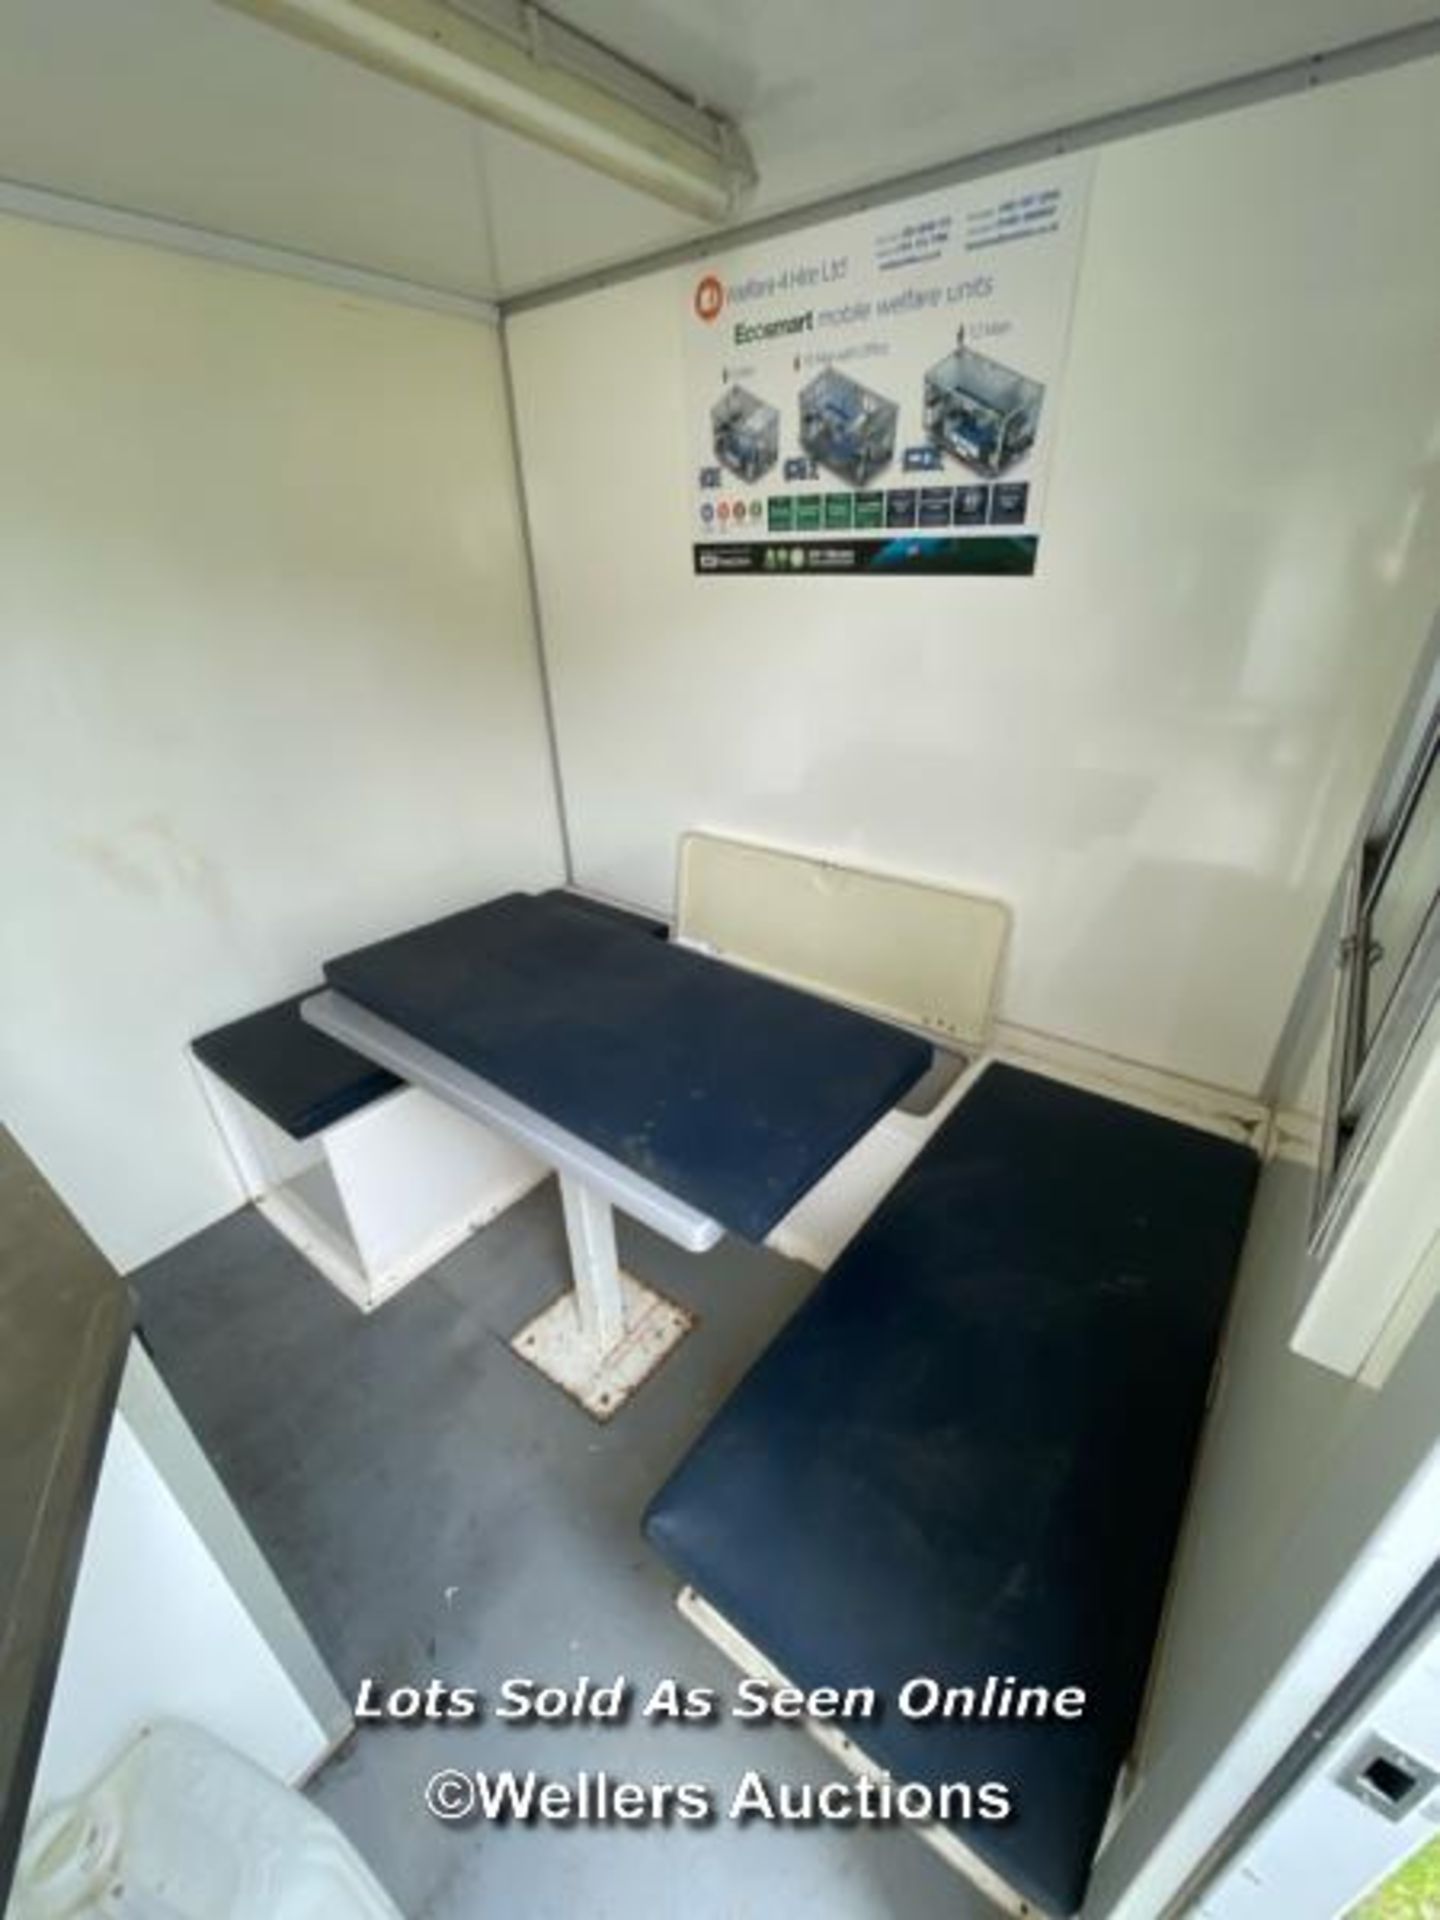 6 PERSON 12 X 7.5FT AJC EASY CABIN TOWABLE WELFARE UNIT, INCLUDES WASH BASIN, KETTLE, MICROWAVE, - Image 8 of 20